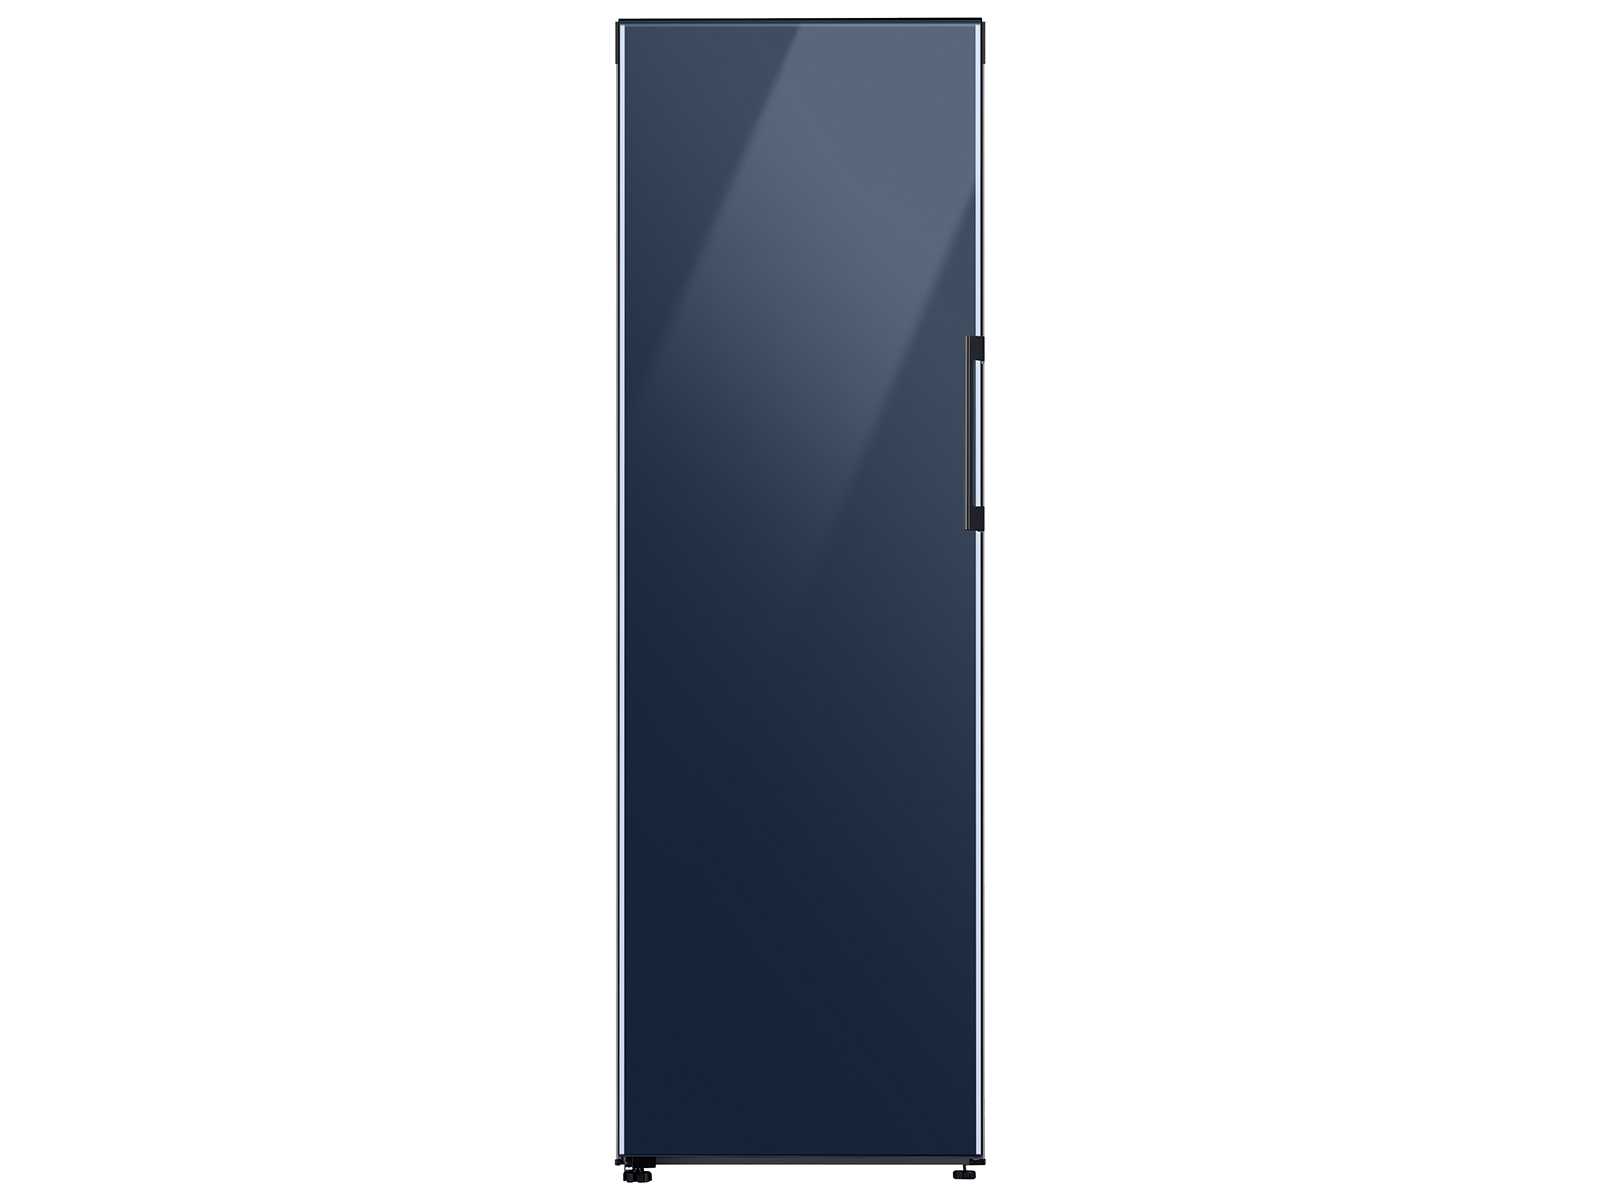 Thumbnail image of 11.4 cu. Ft. Bespoke Flex Column Refrigerator with Flexible Design in Navy Glass